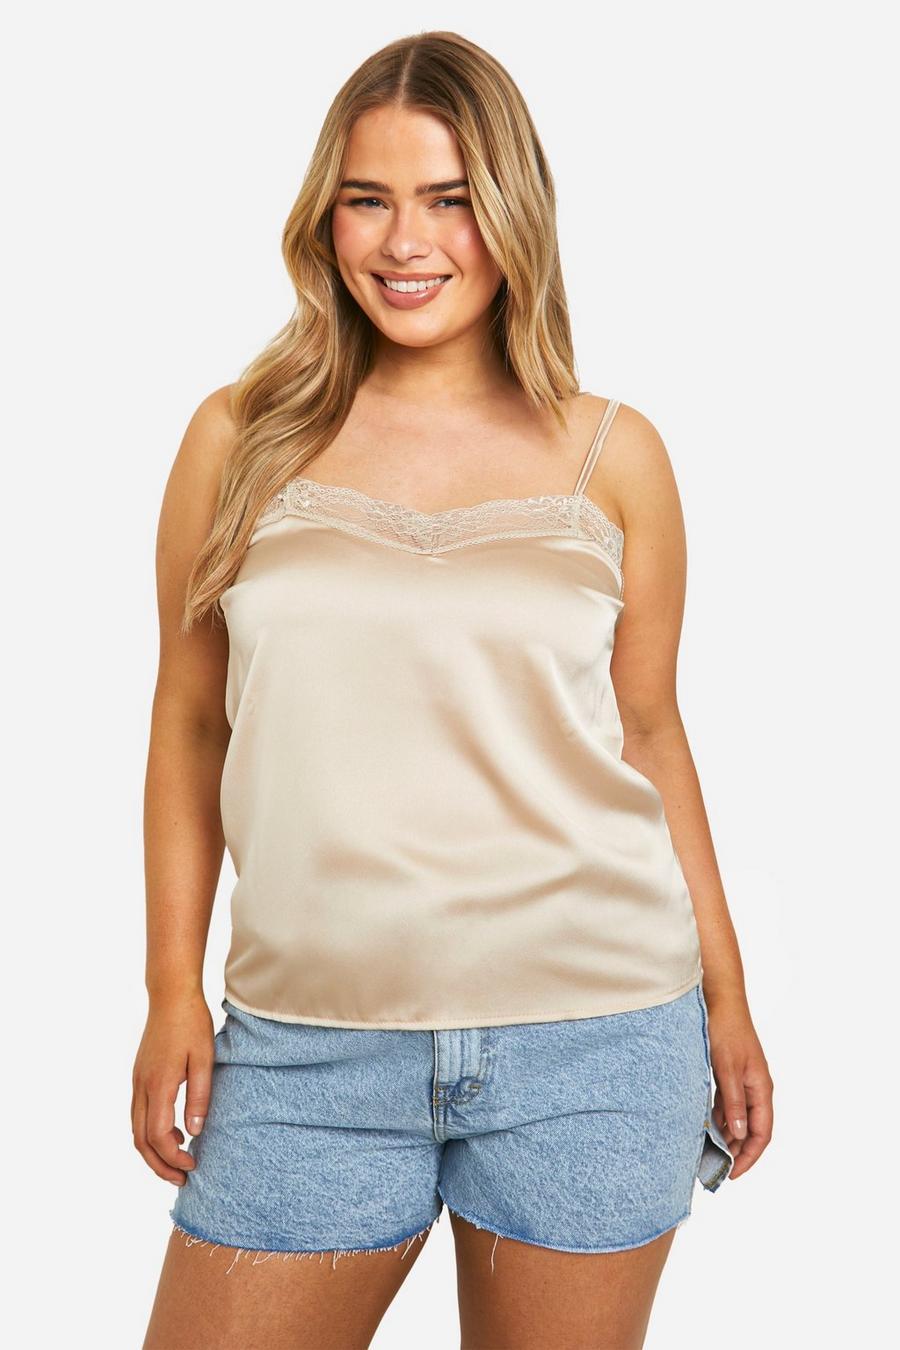 Champagne Plus Lace Insert Satin Cami Top